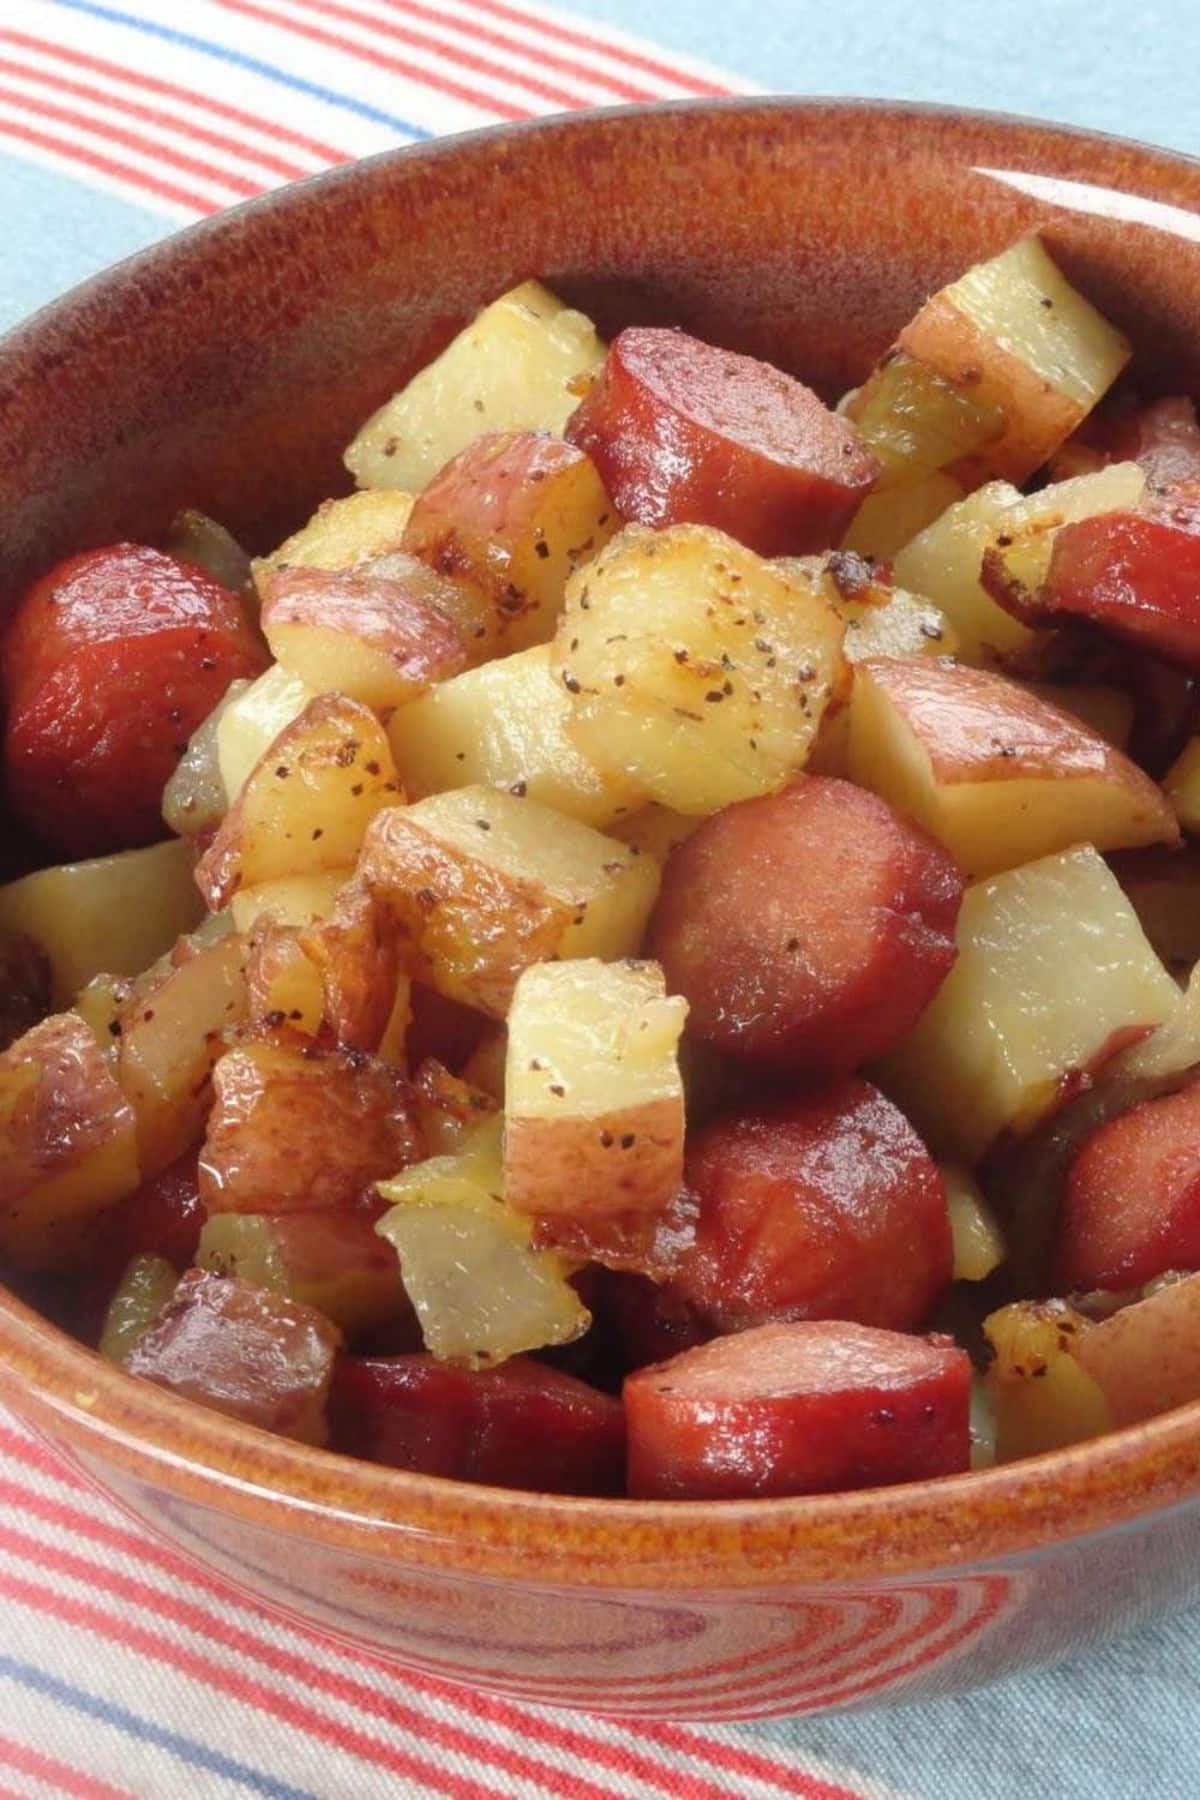 Tasty hot dog and potato hash in a bowl.